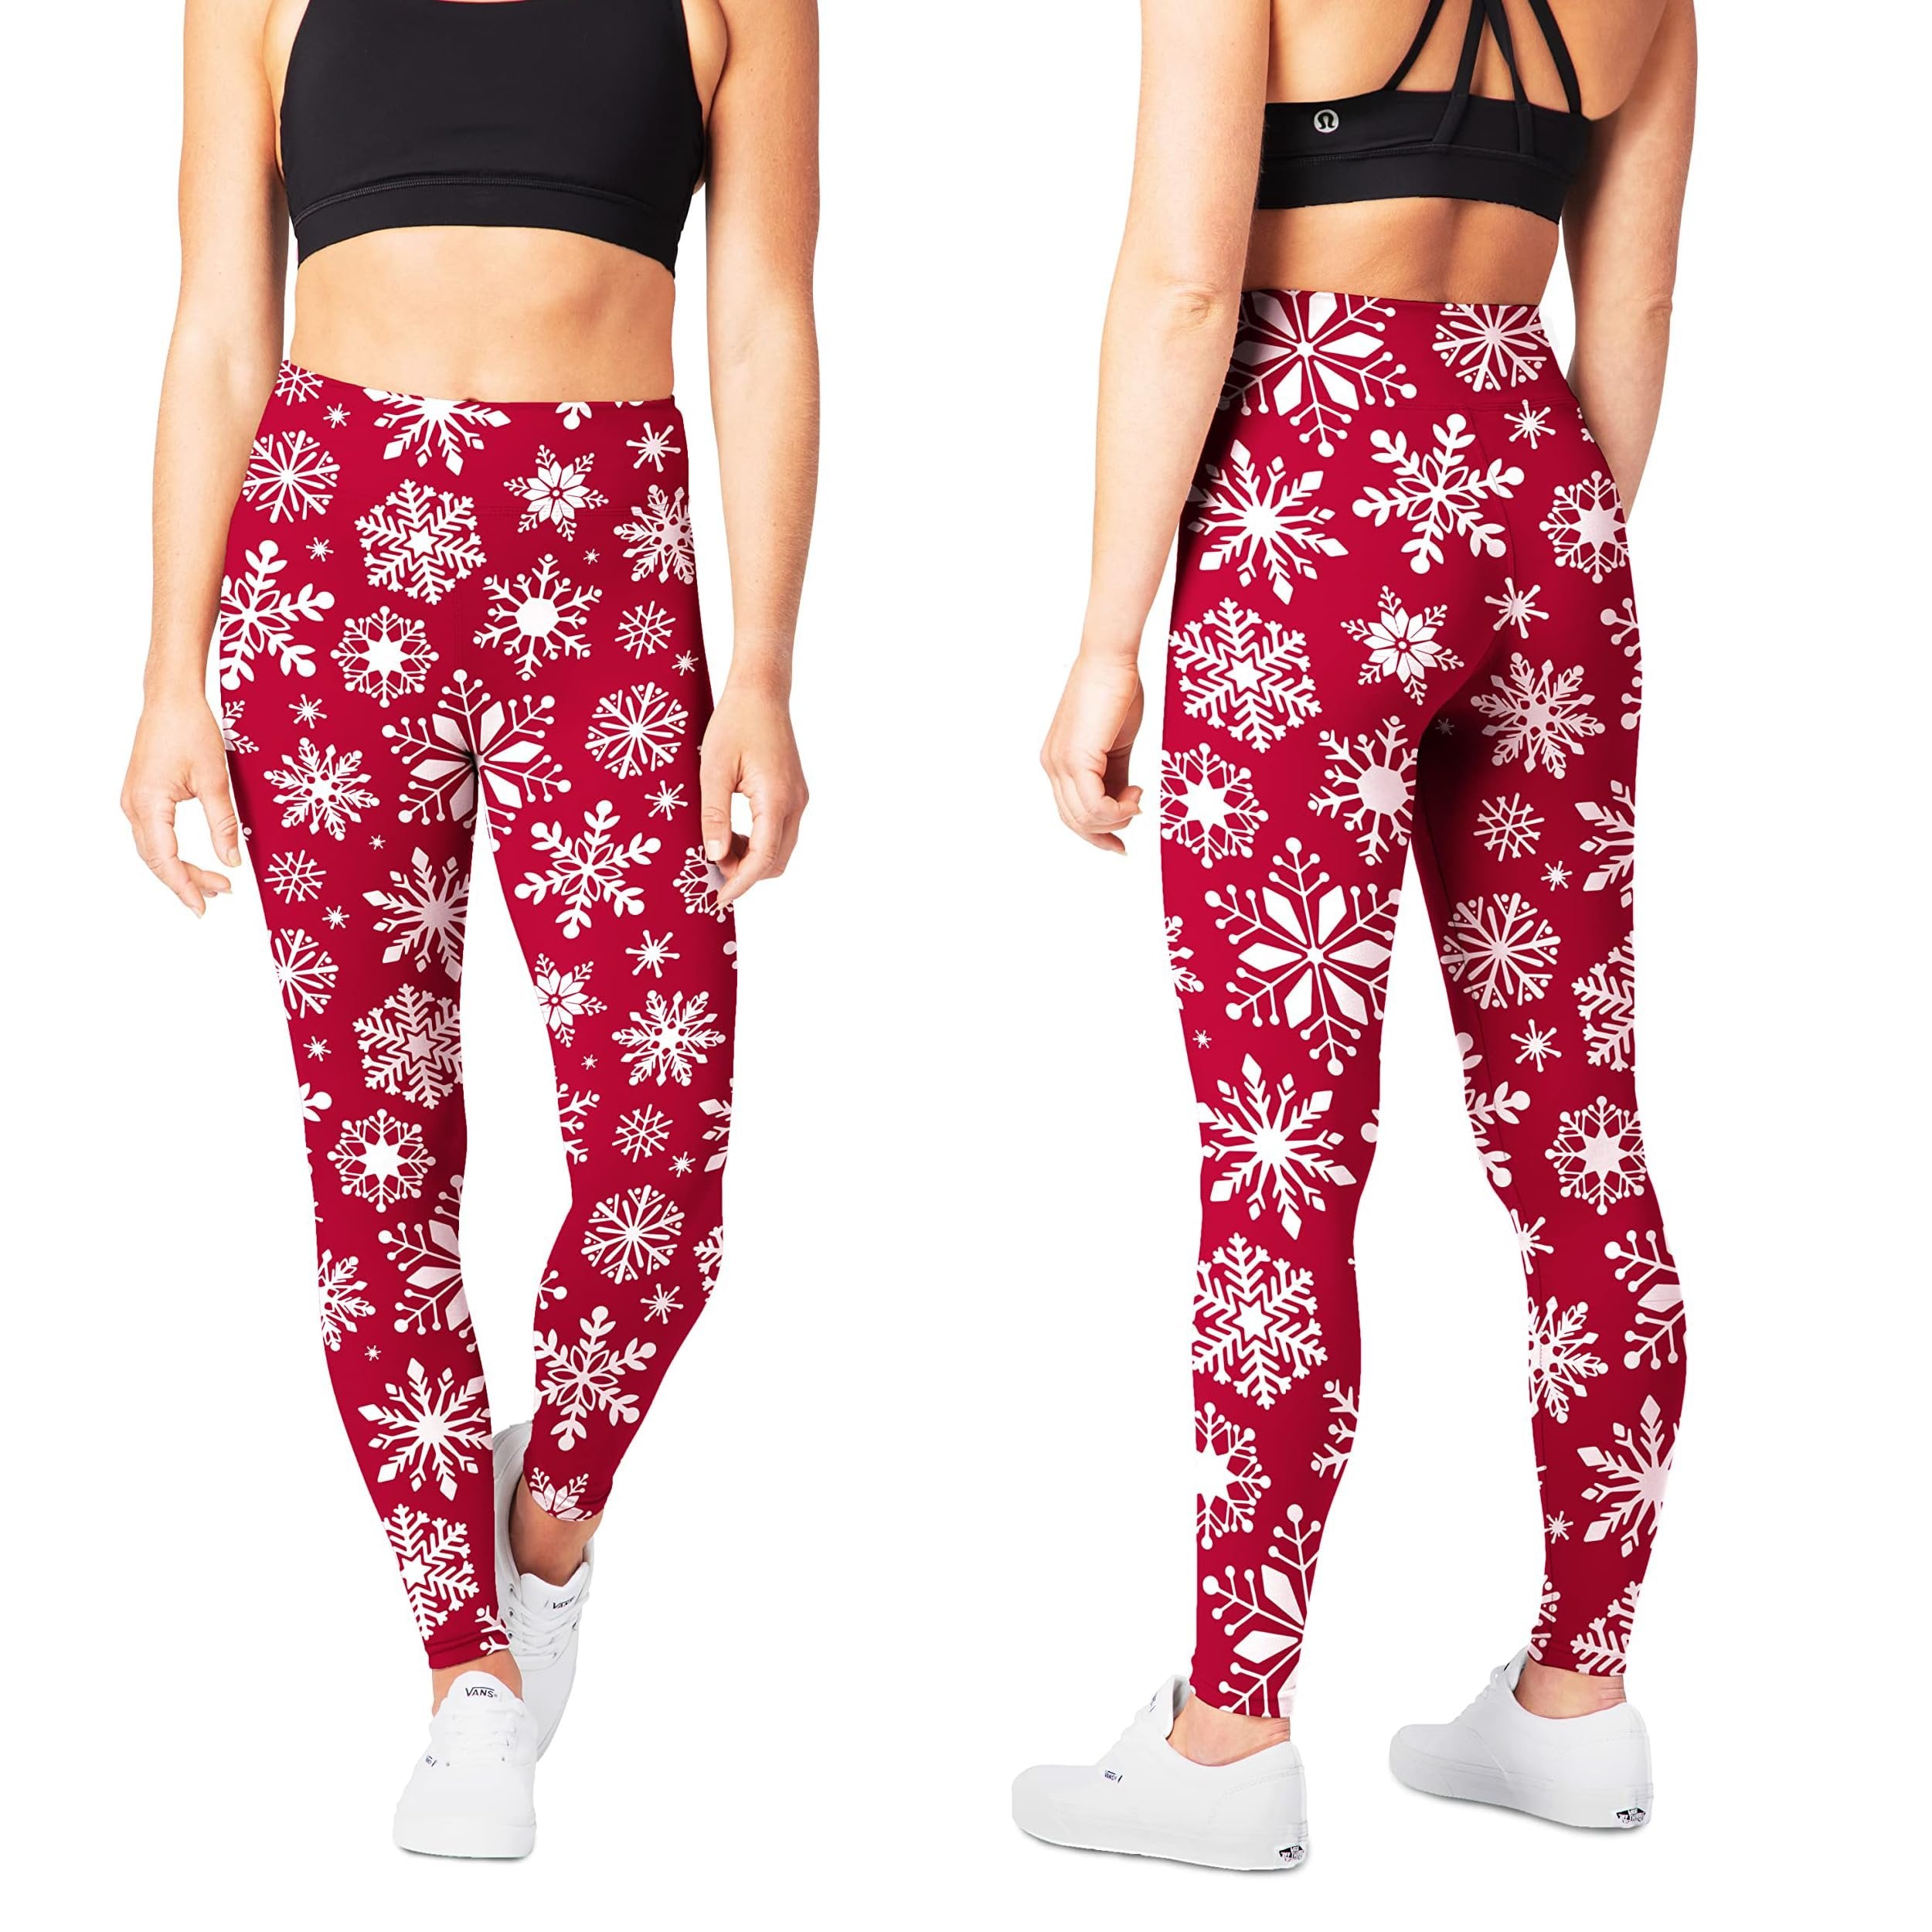 SATINA Womens Christmas Pants - Buttery Soft Highwaisted Holiday Leggings, Red Snowflake, One Size